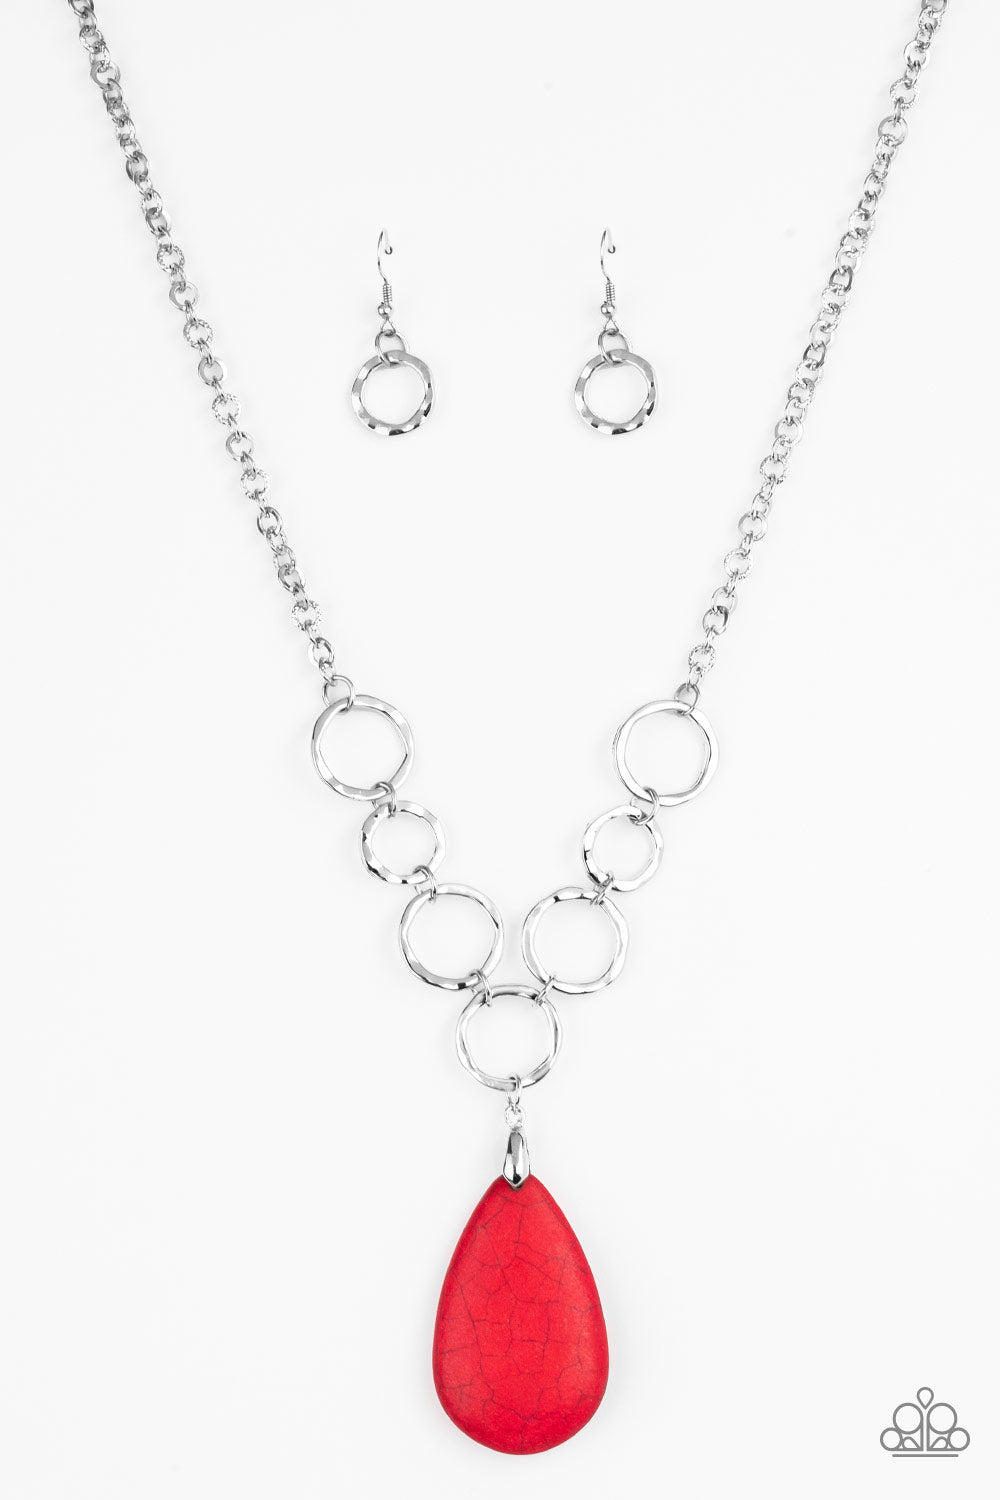 Paparazzi Accessories Livin On A PRAIRIE - Red Necklace - Be Adored Jewelry